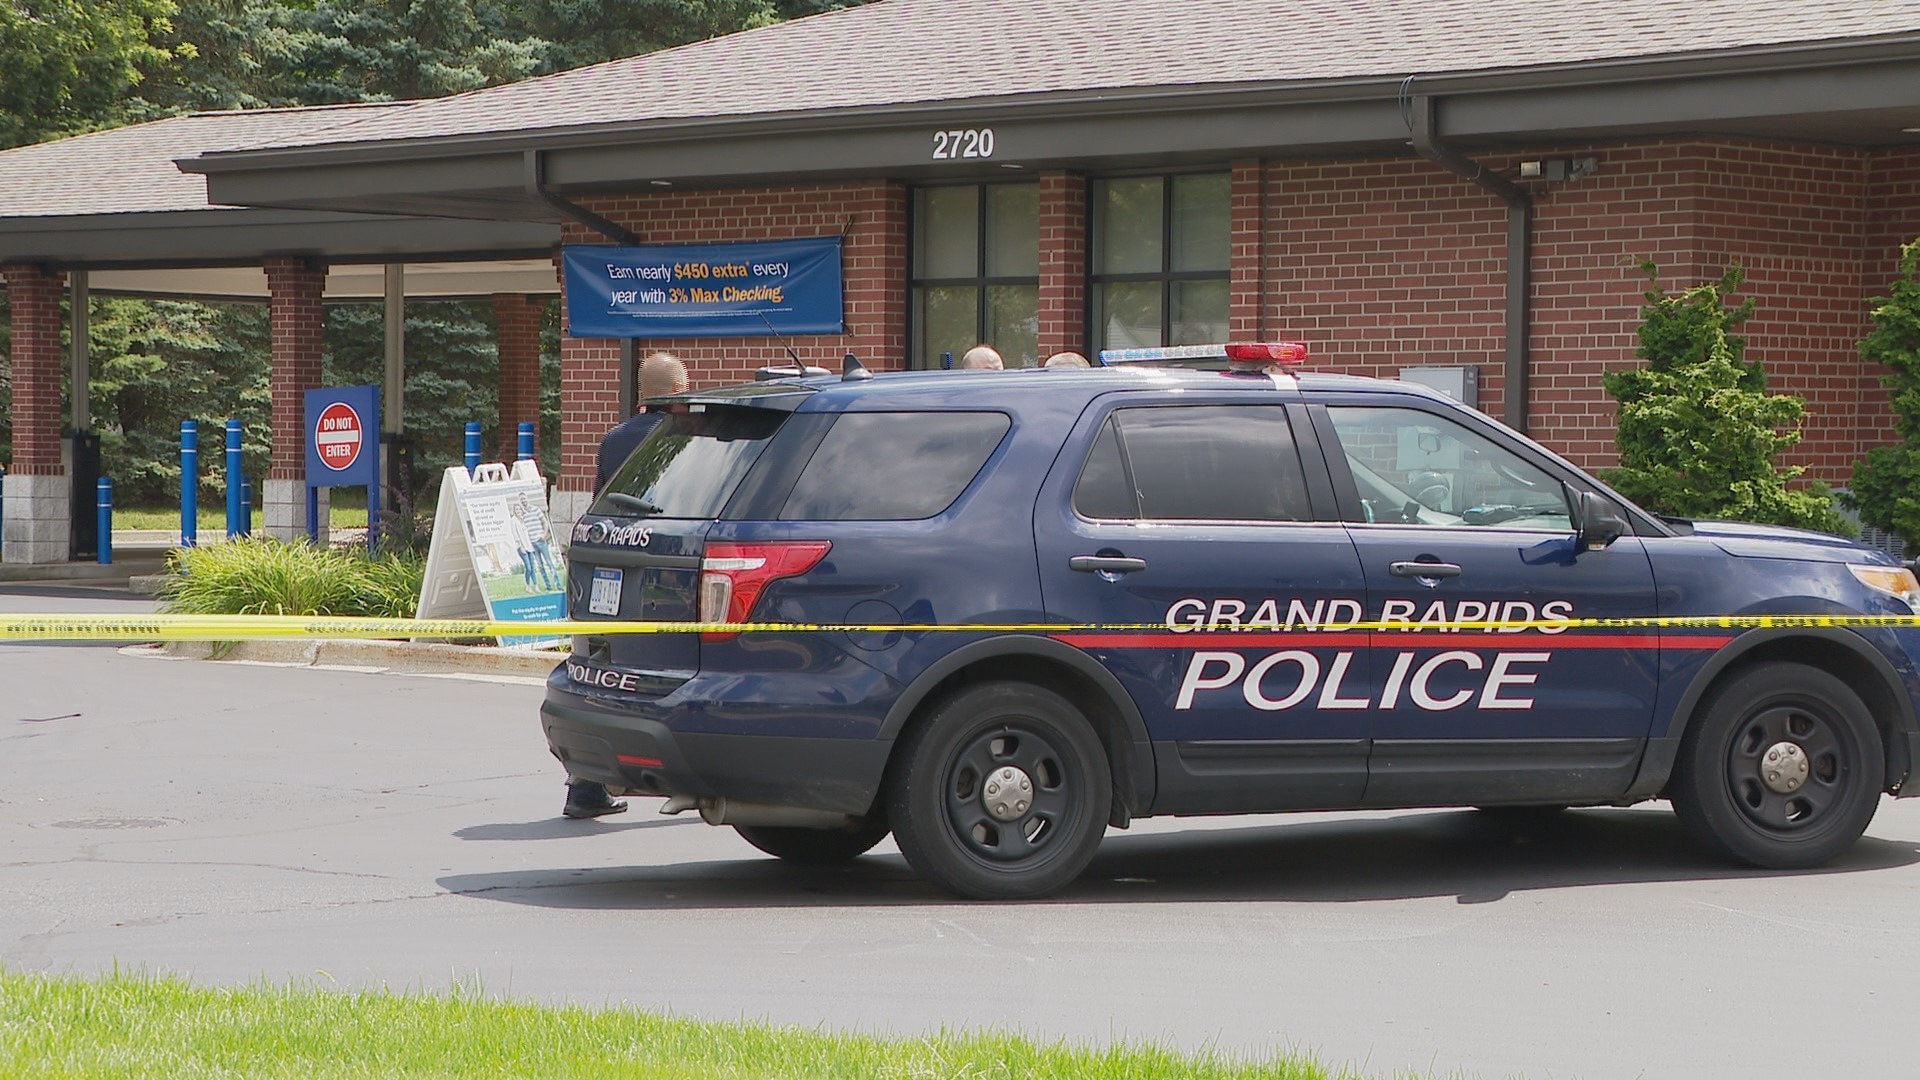 While police are investigating an armed robbery at the Lake Michigan Credit Union branch on Lake Michigan Drive, a witness is still in shock.